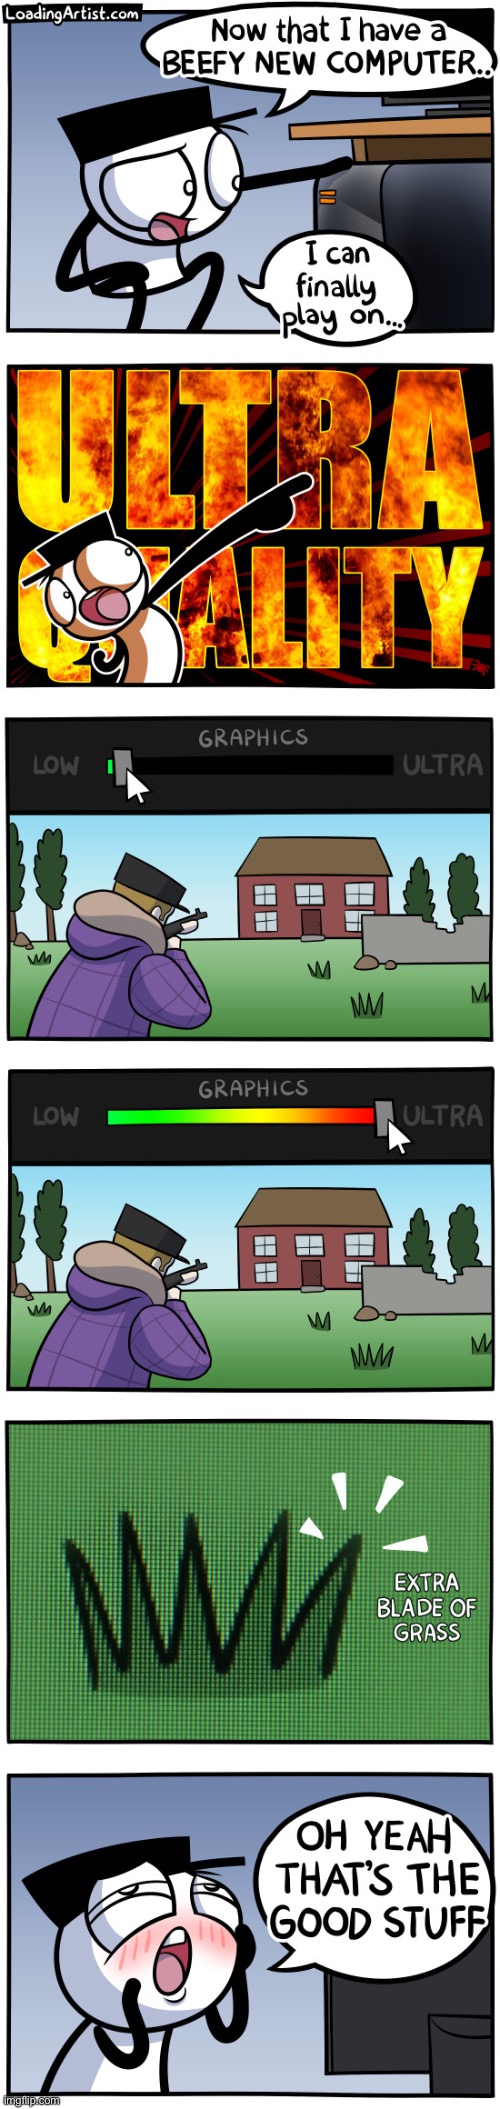 1 blade of grass, pathetic | image tagged in memes,funny,comics,loading artist | made w/ Imgflip meme maker